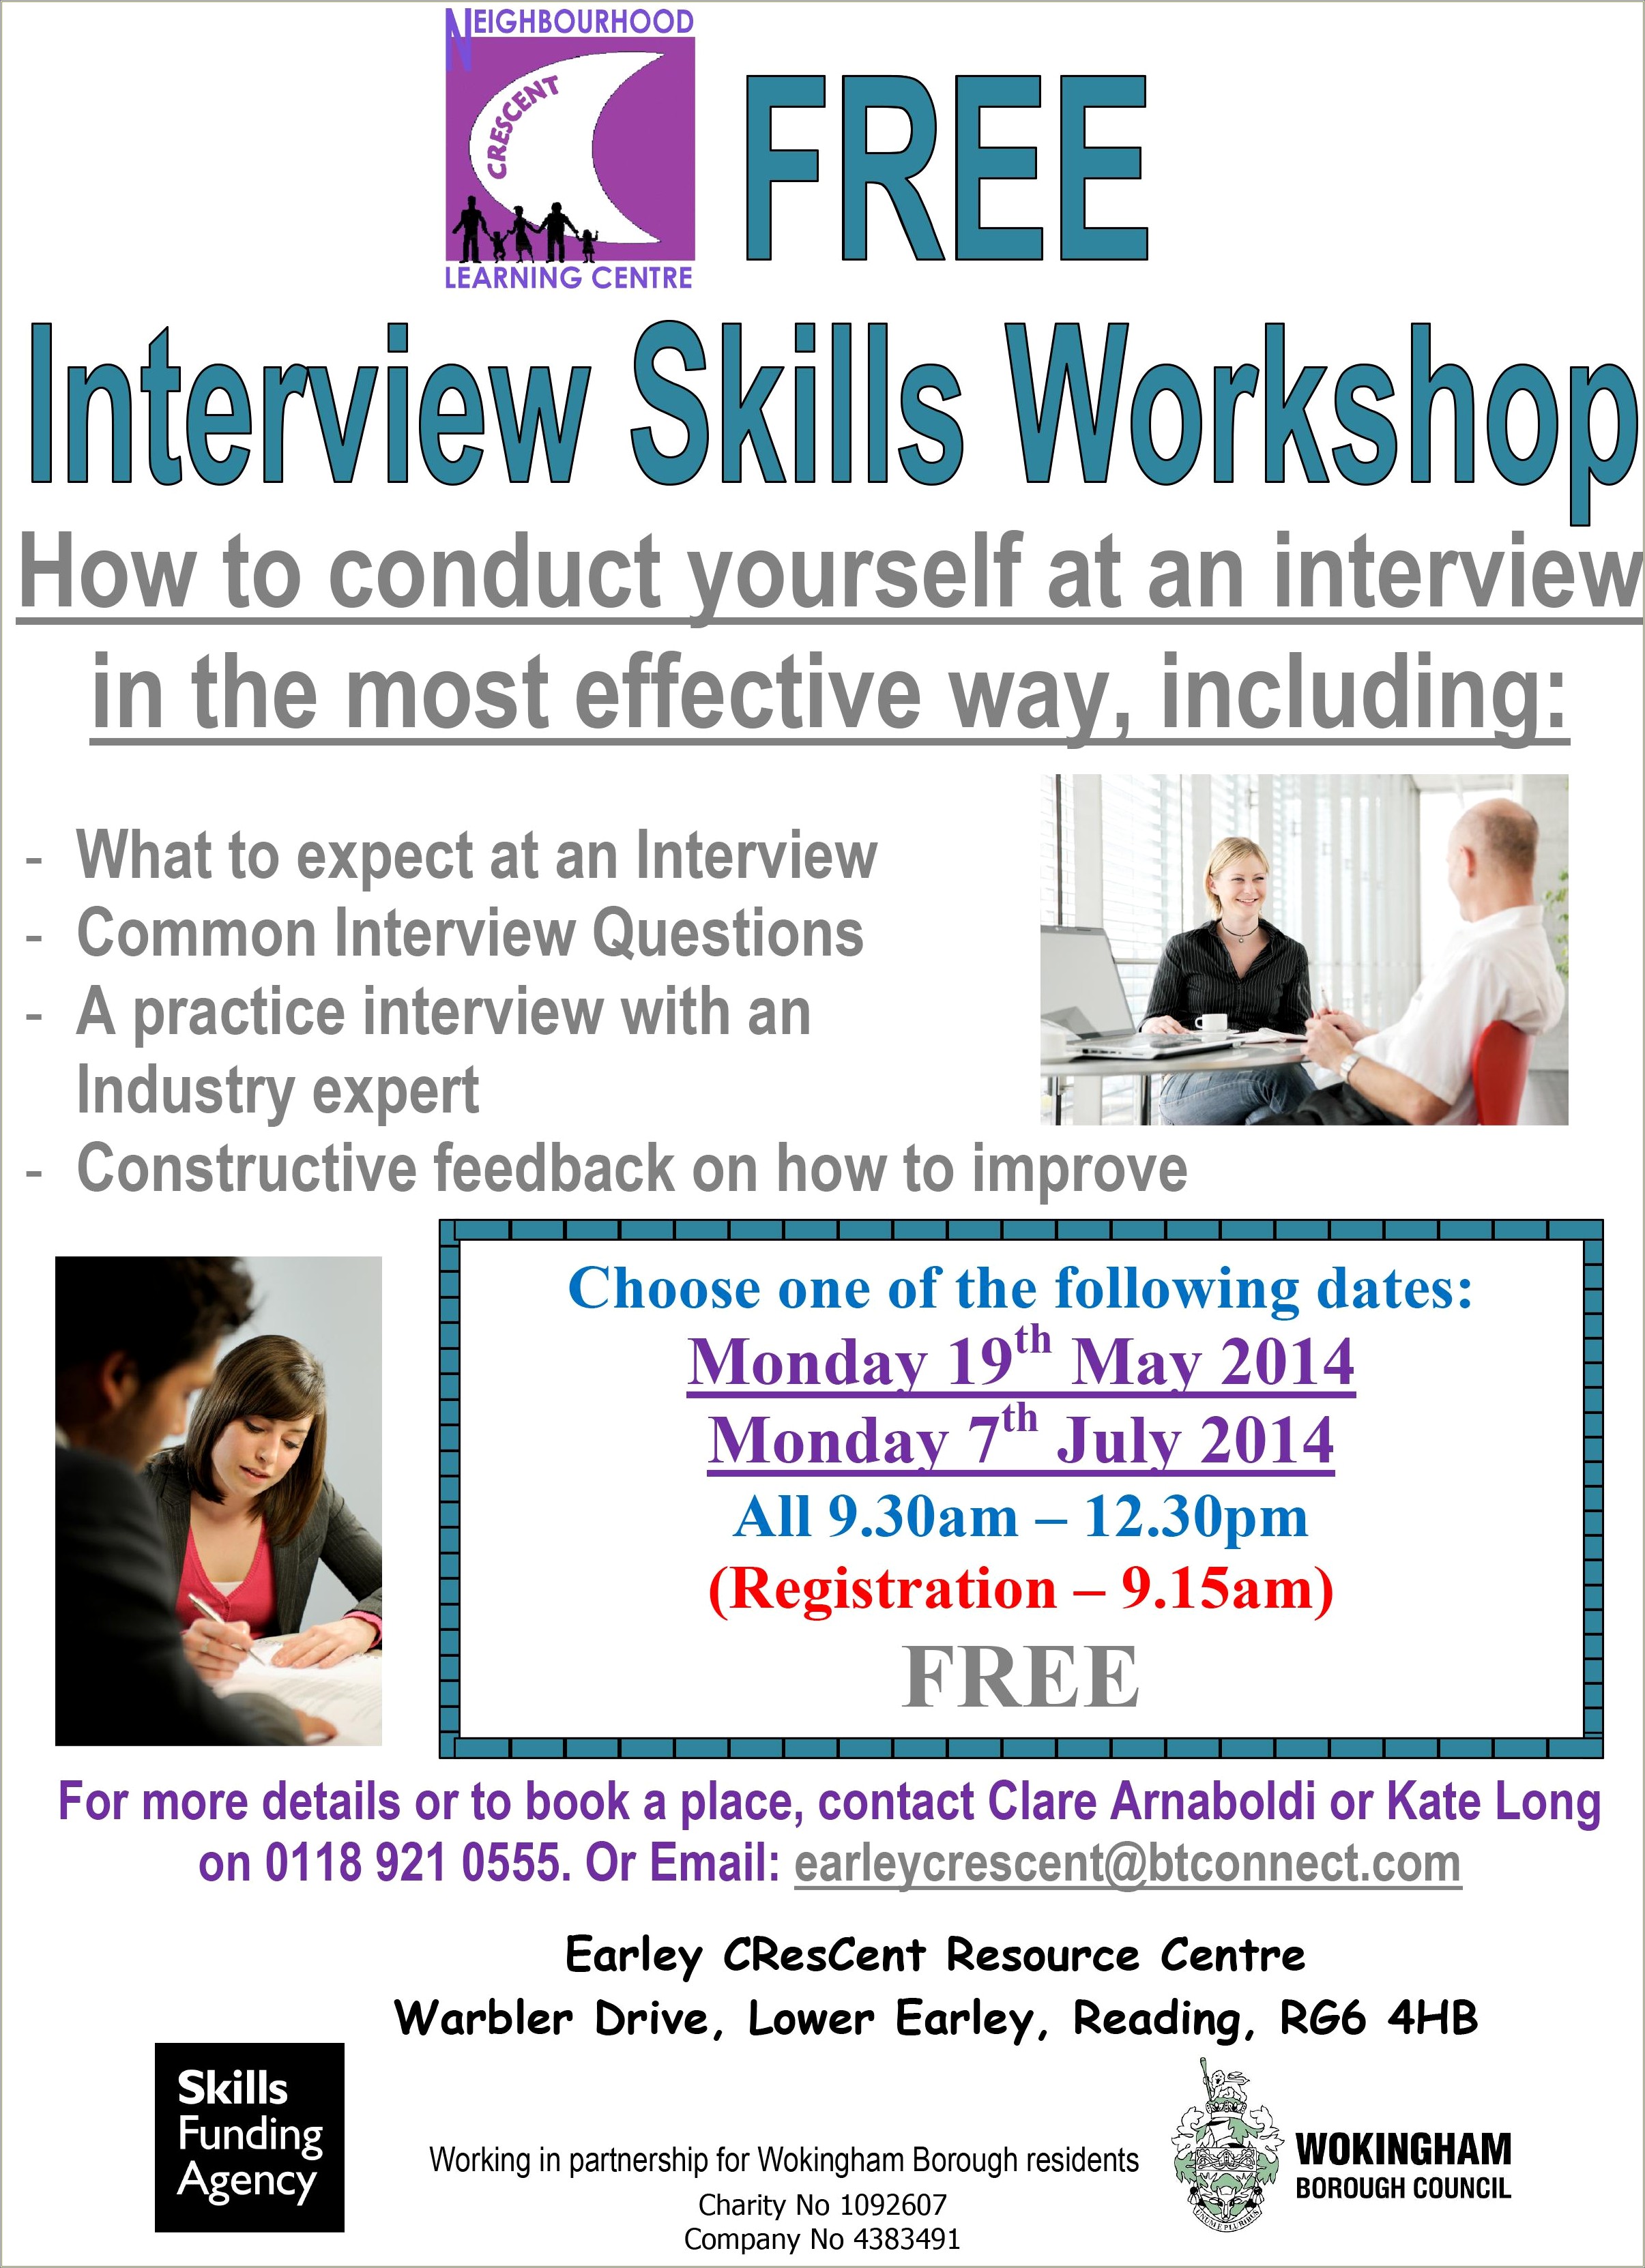 Workshop Such As Resume Writing And Interview Skills